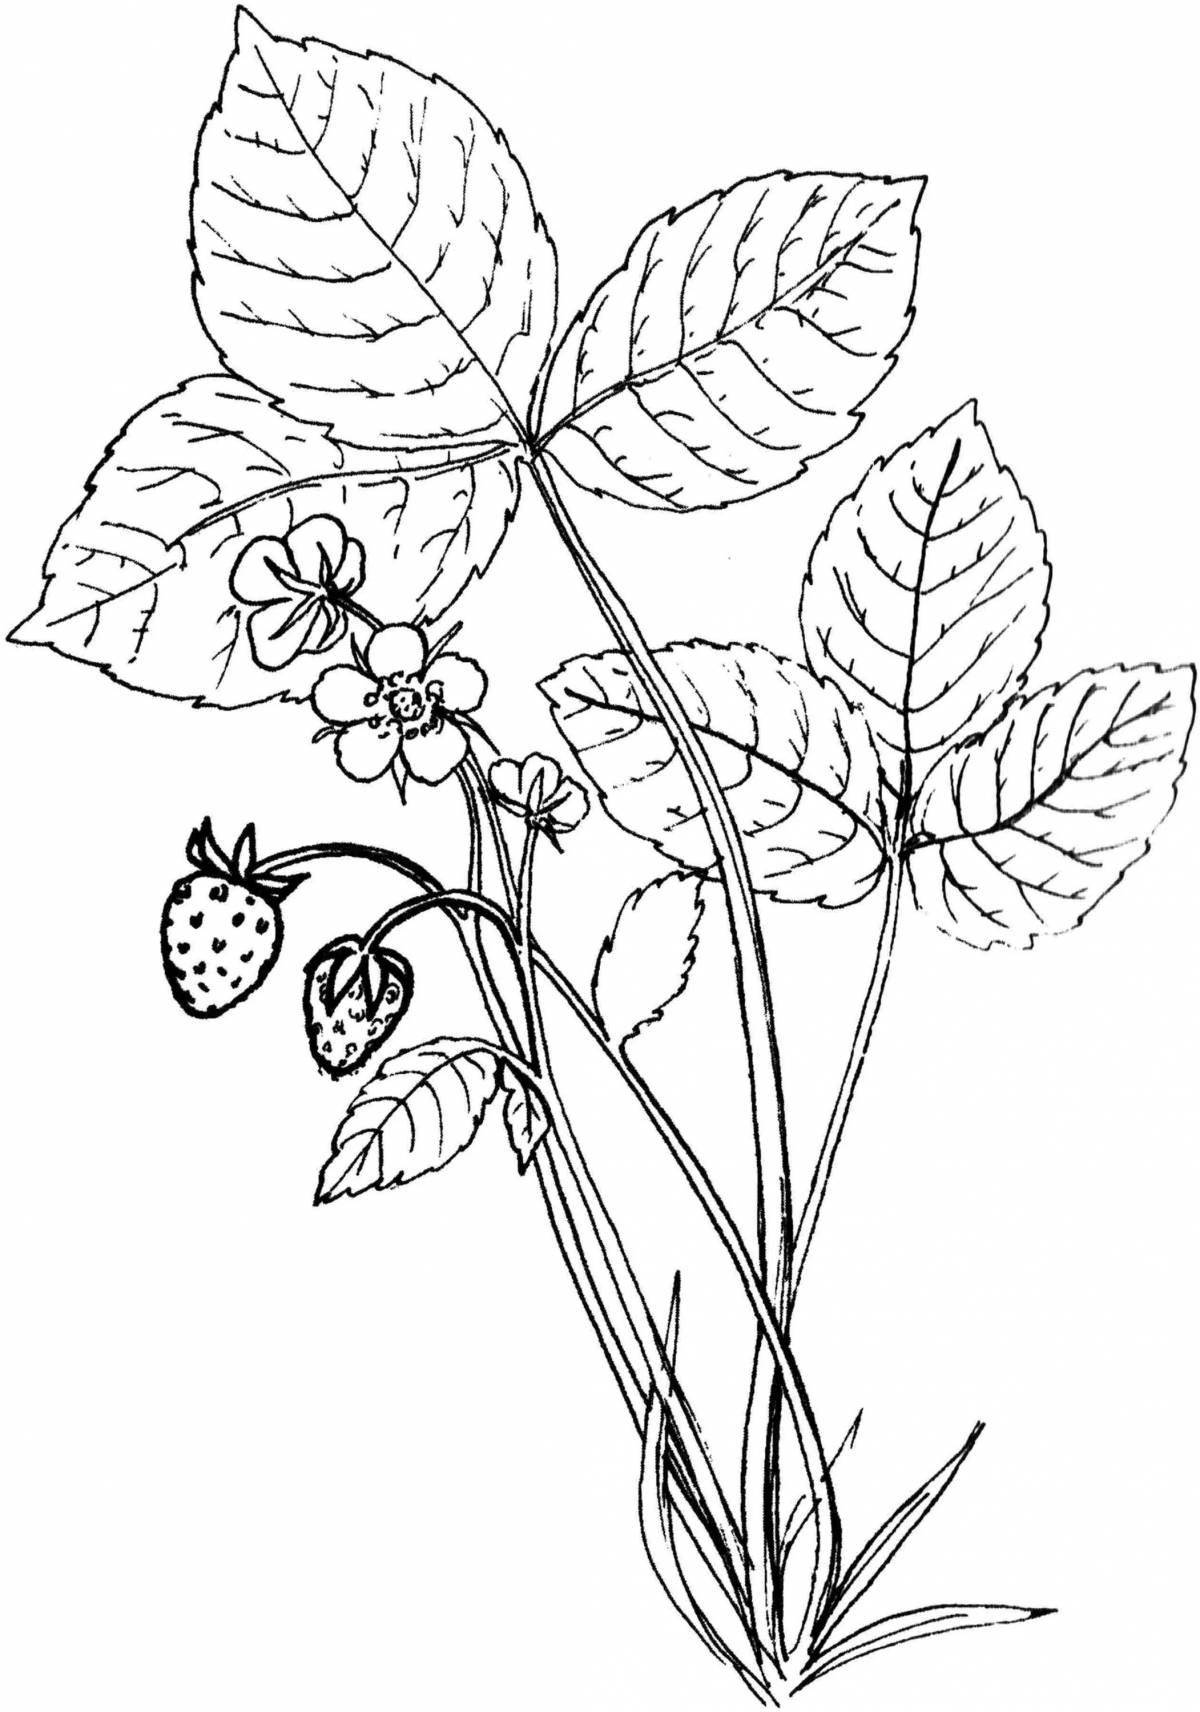 Detailed coloring of medicinal plants